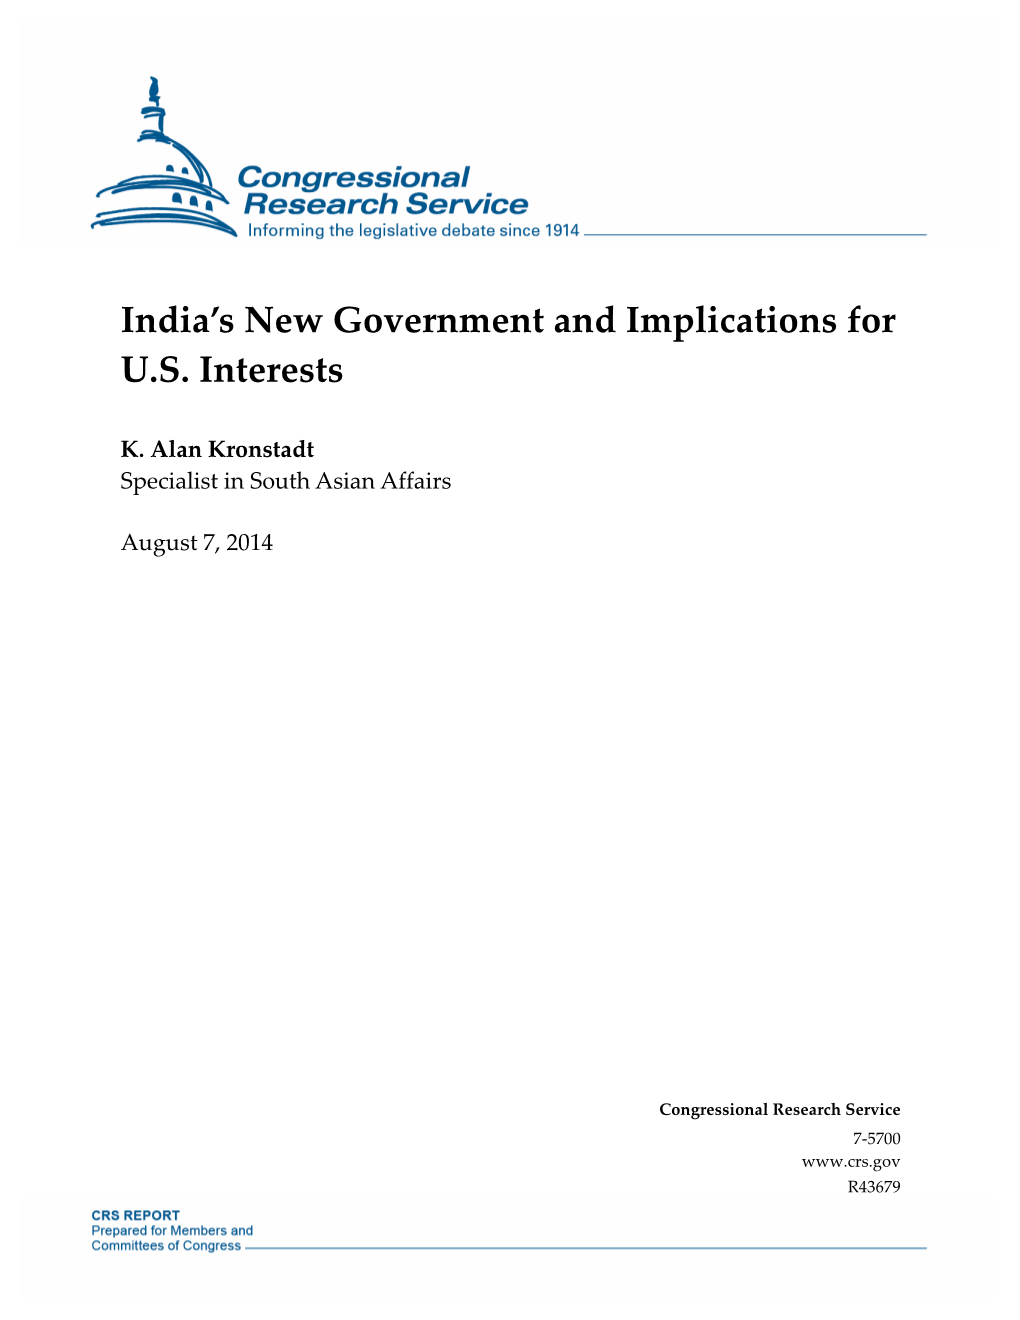 India's New Government and Implications for U.S. Interests